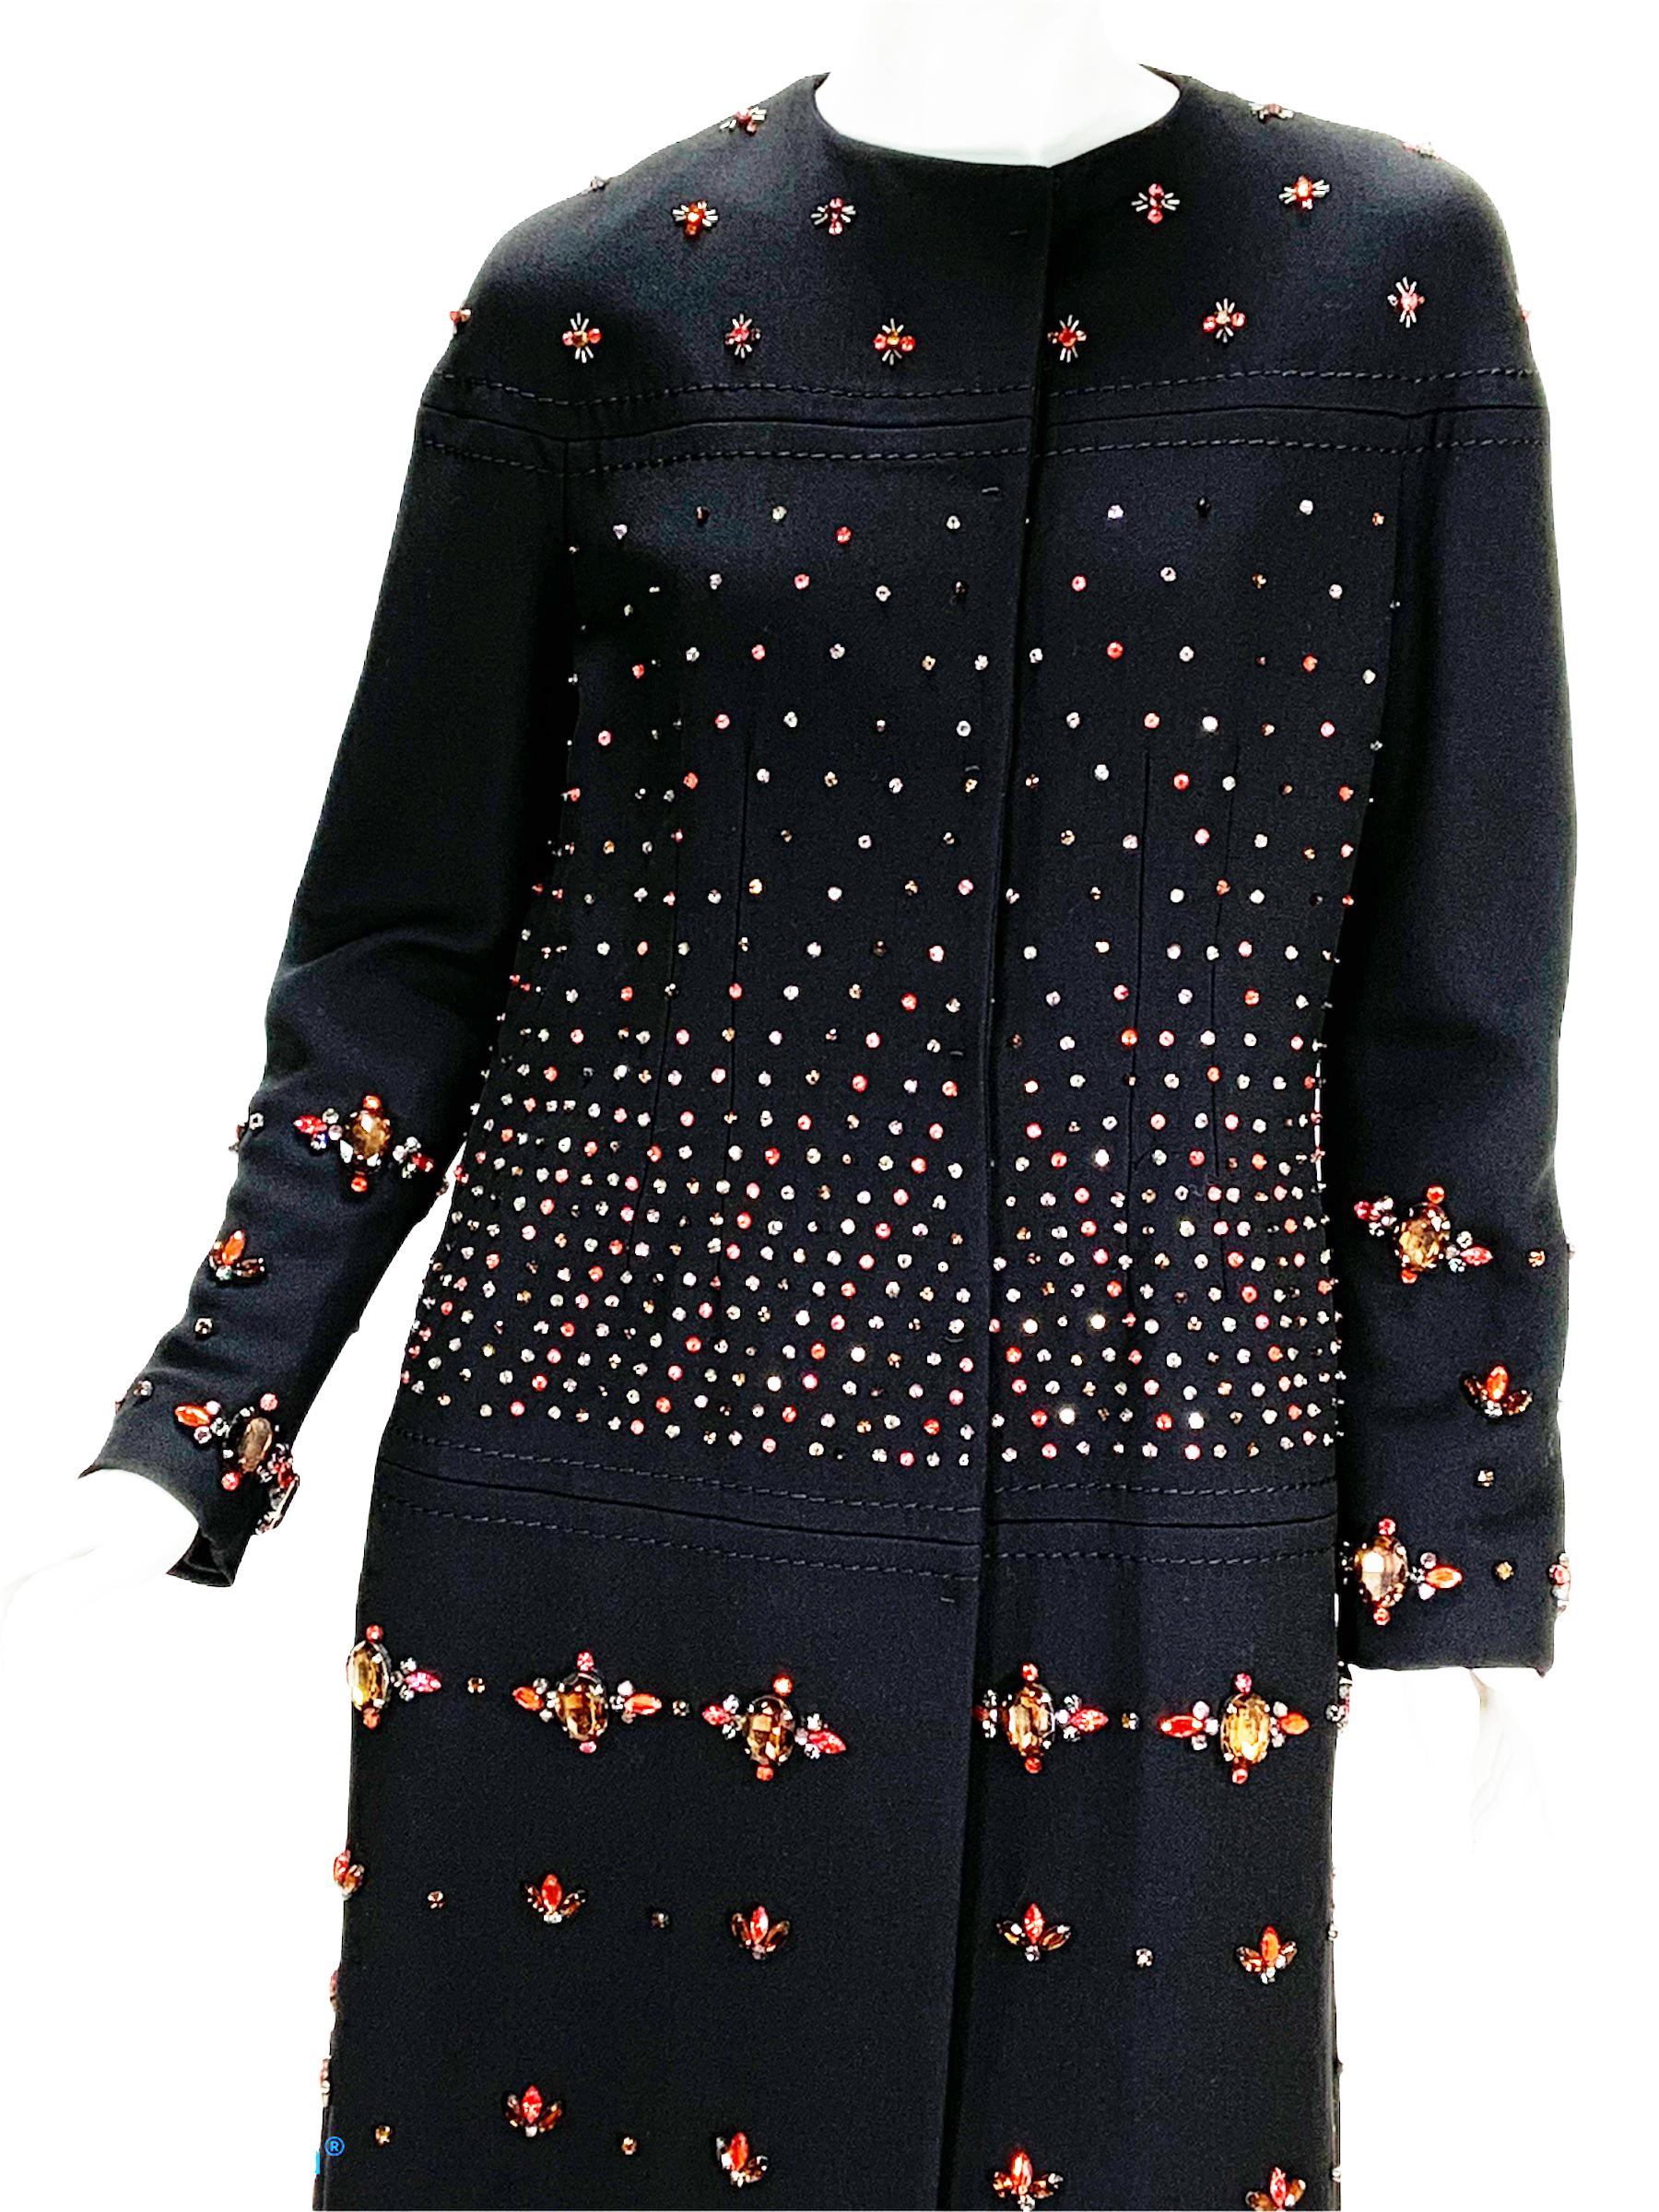 Valentino Black Runway Embellished Coat
Designer size 8
F/W 2009 Collection
Fully Embellished with Colorful Glass Beads, Content - 50% Wool, 50% Silk, Two Side Pockets, Fully Lined, Snap Closure.
A-Line Silhouette. Measurements: Length - 42 inches,